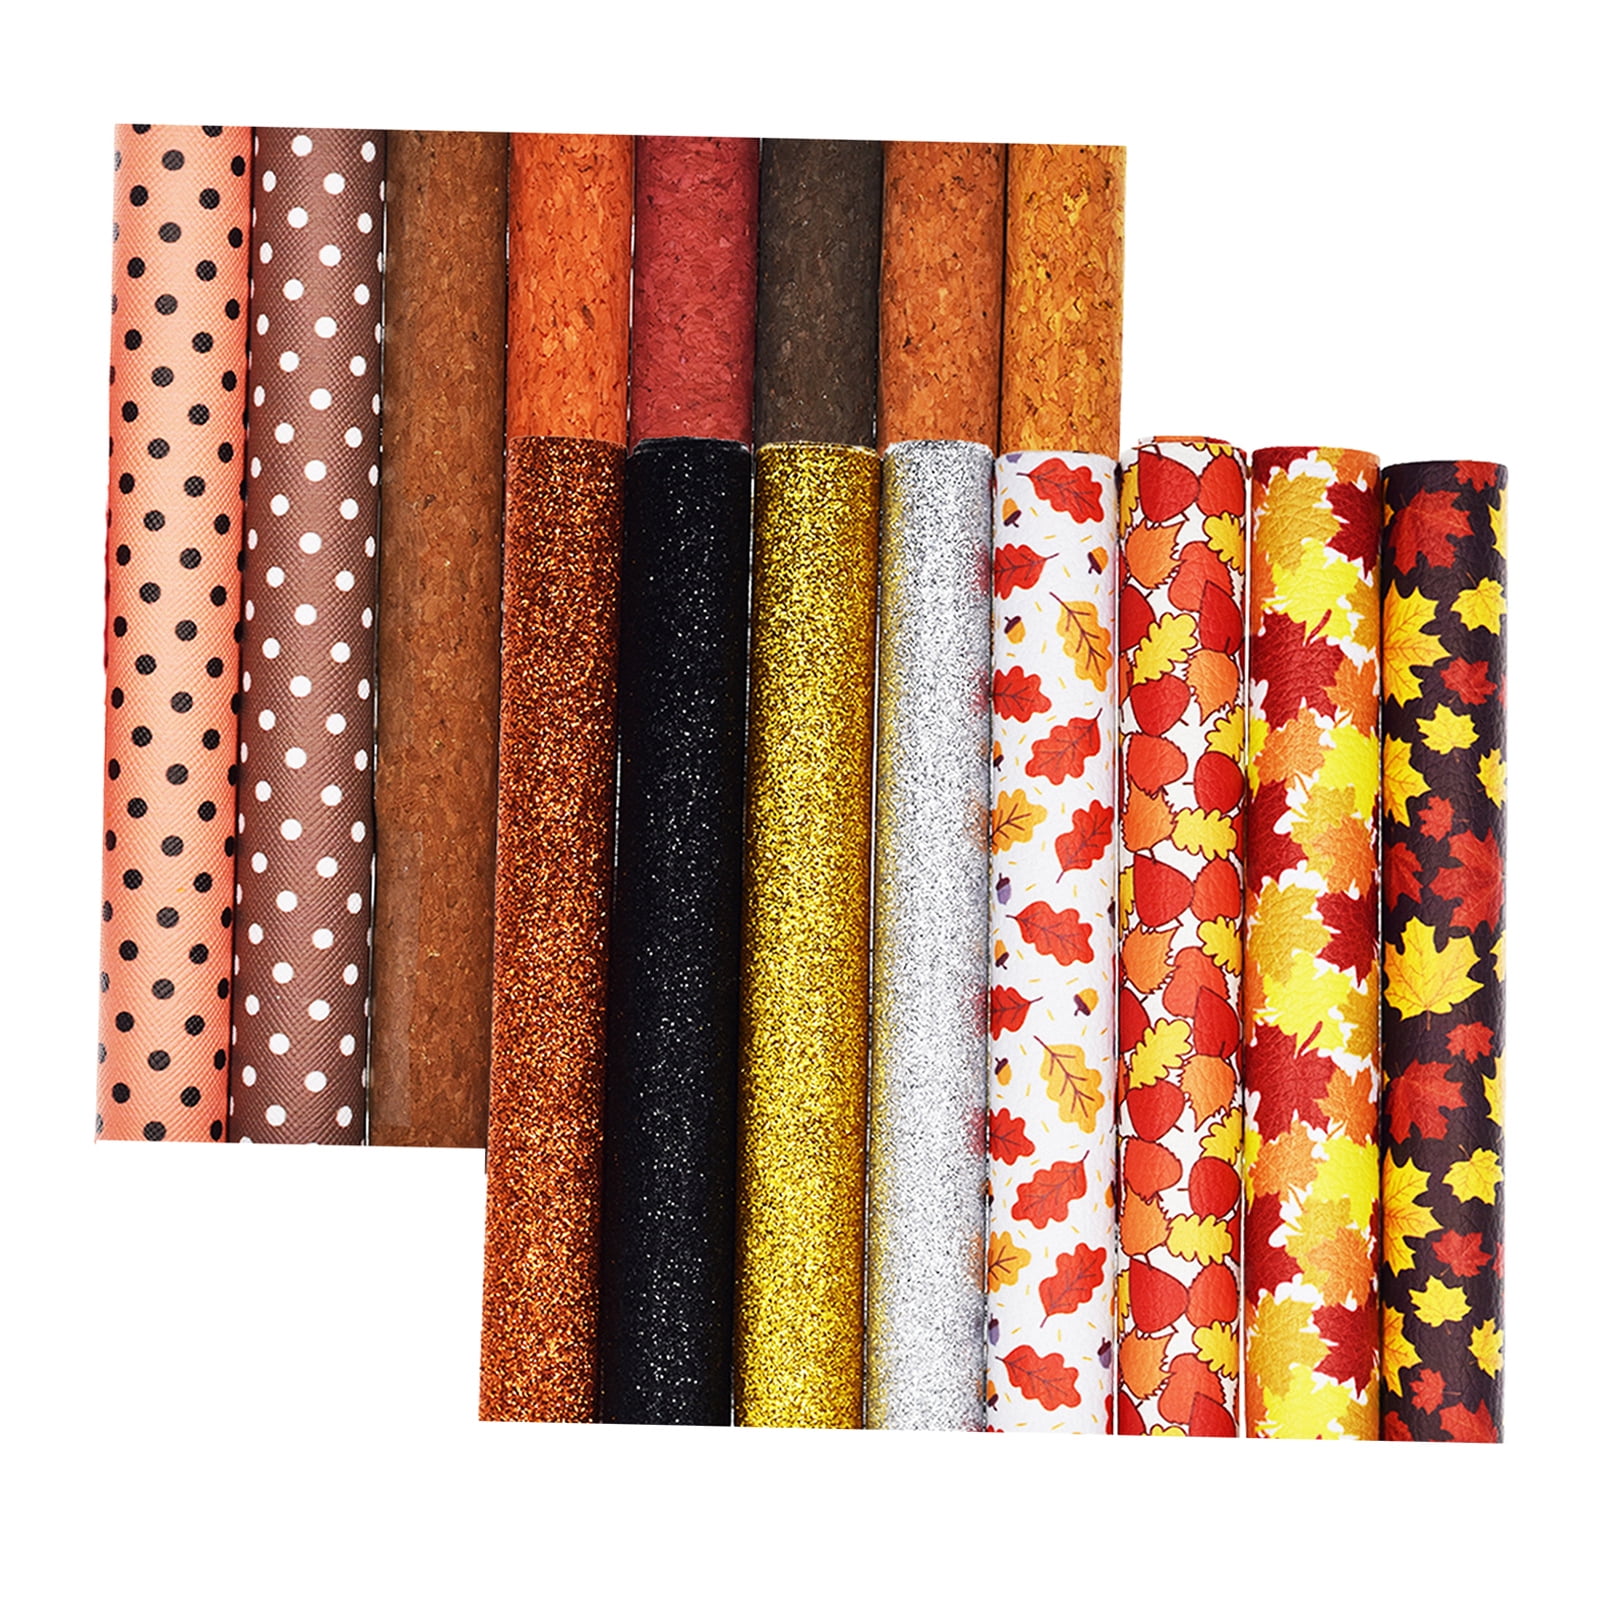 Synthetic Leather.6 Roll Set. Thanksgiving Faux Leather Set